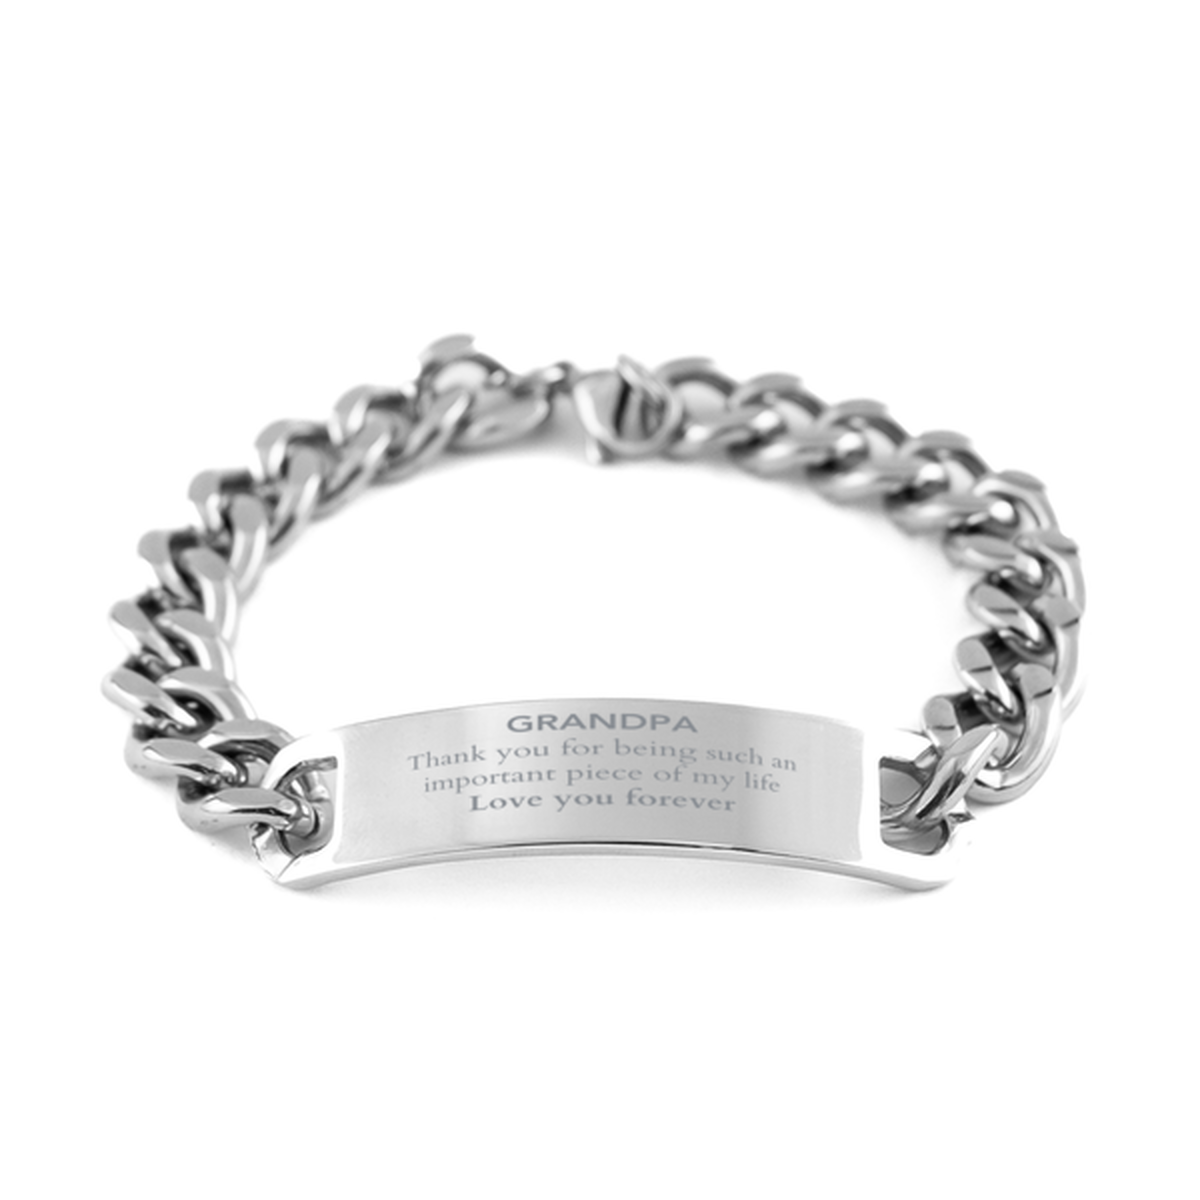 Appropriate Grandpa Cuban Chain Stainless Steel Bracelet Epic Birthday Gifts for Grandpa Thank you for being such an important piece of my life Grandpa Christmas Mothers Fathers Day